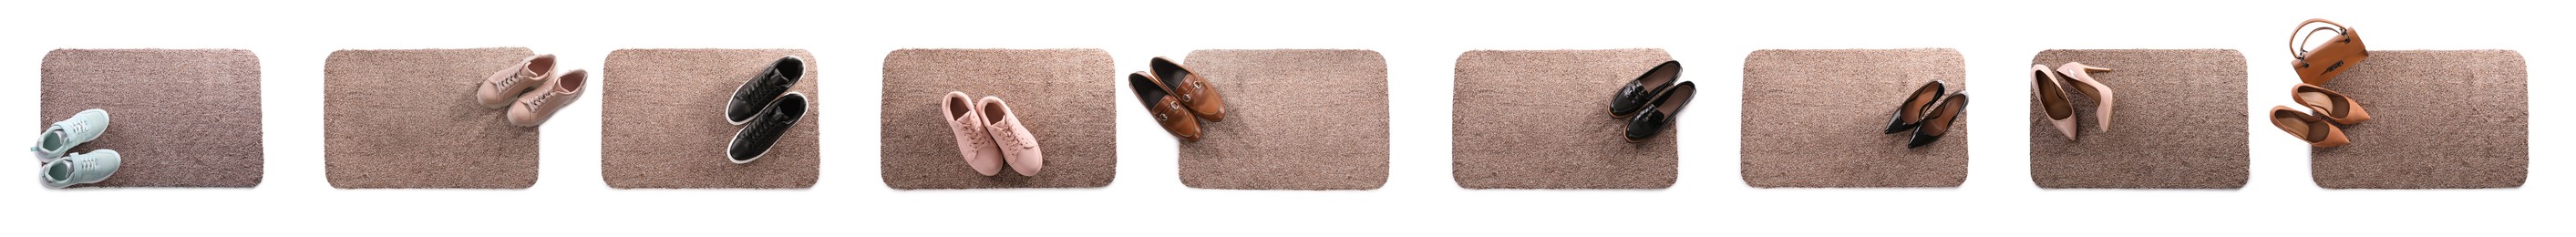 Set with door mats and different shoes on white background, top view. Banner design